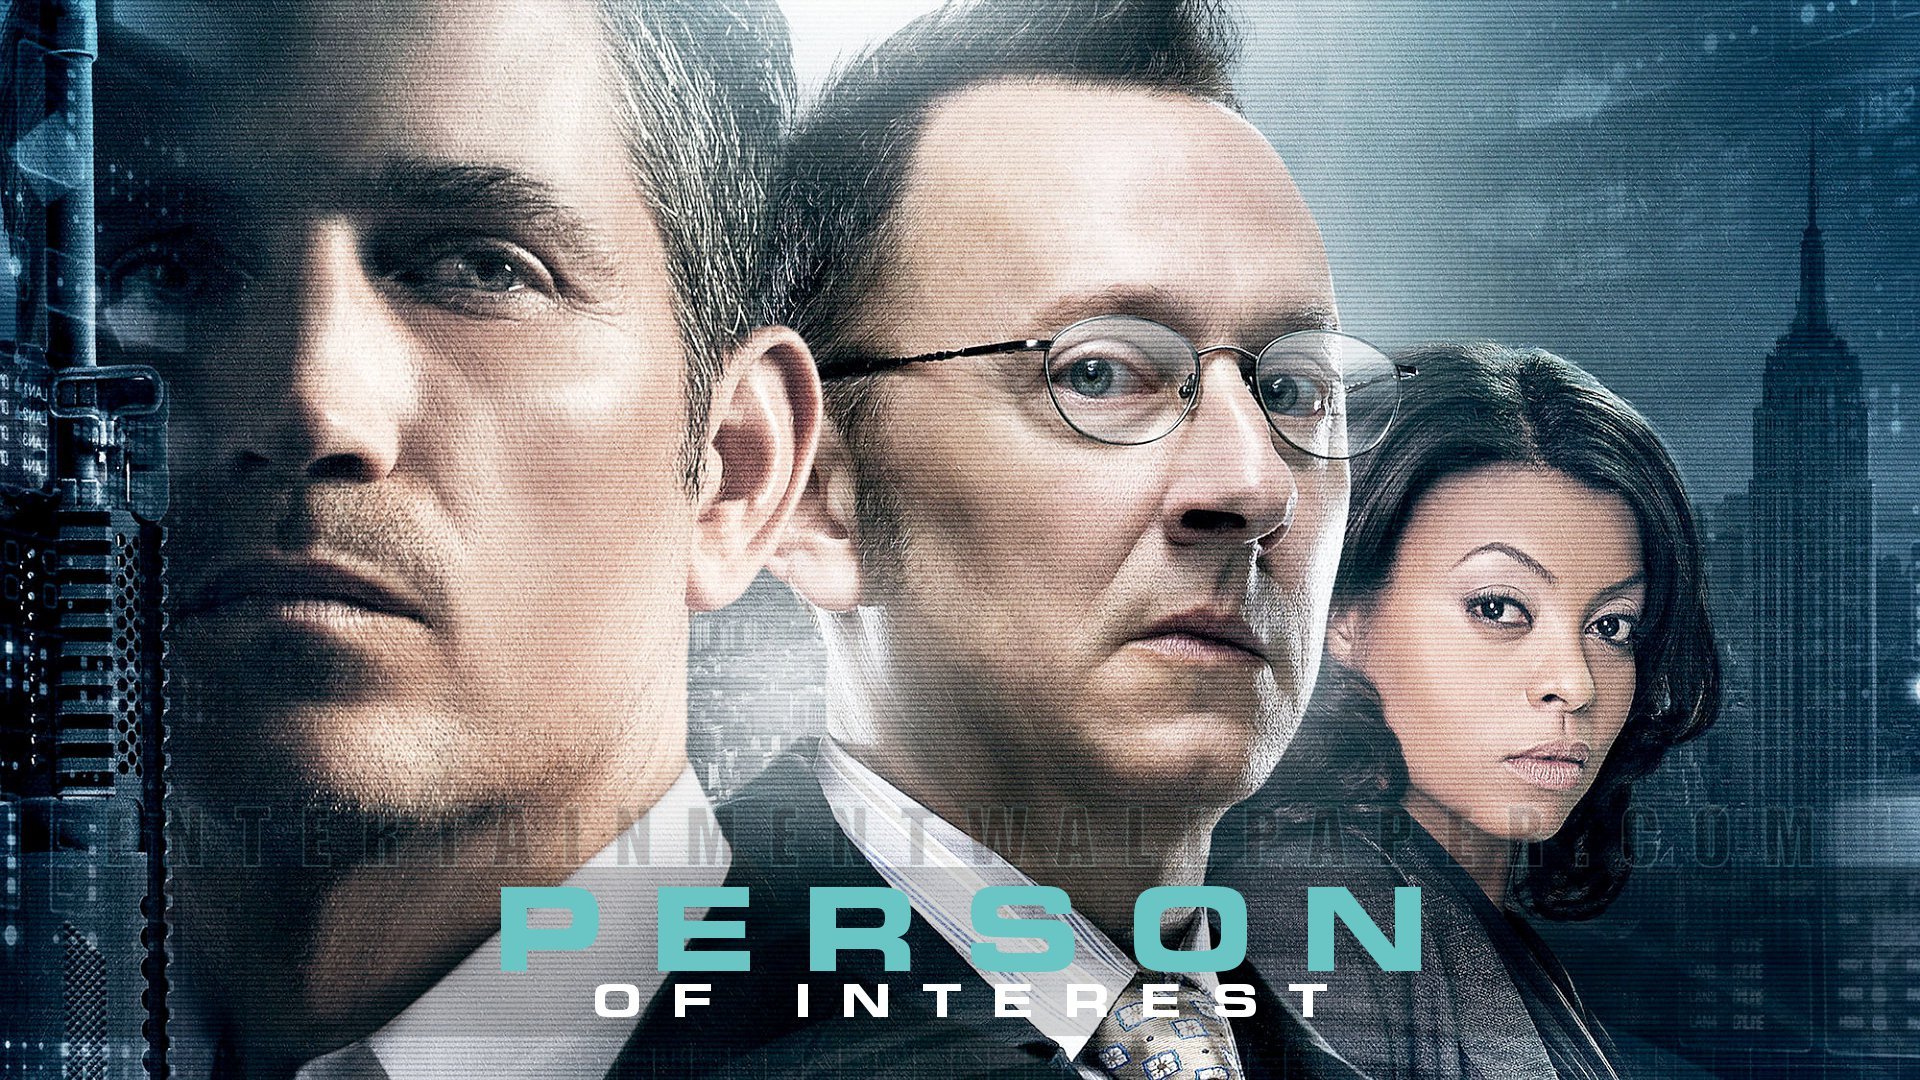 person, Of, Interest, Action, Drama, Mystery, Series, Crime Wallpaper